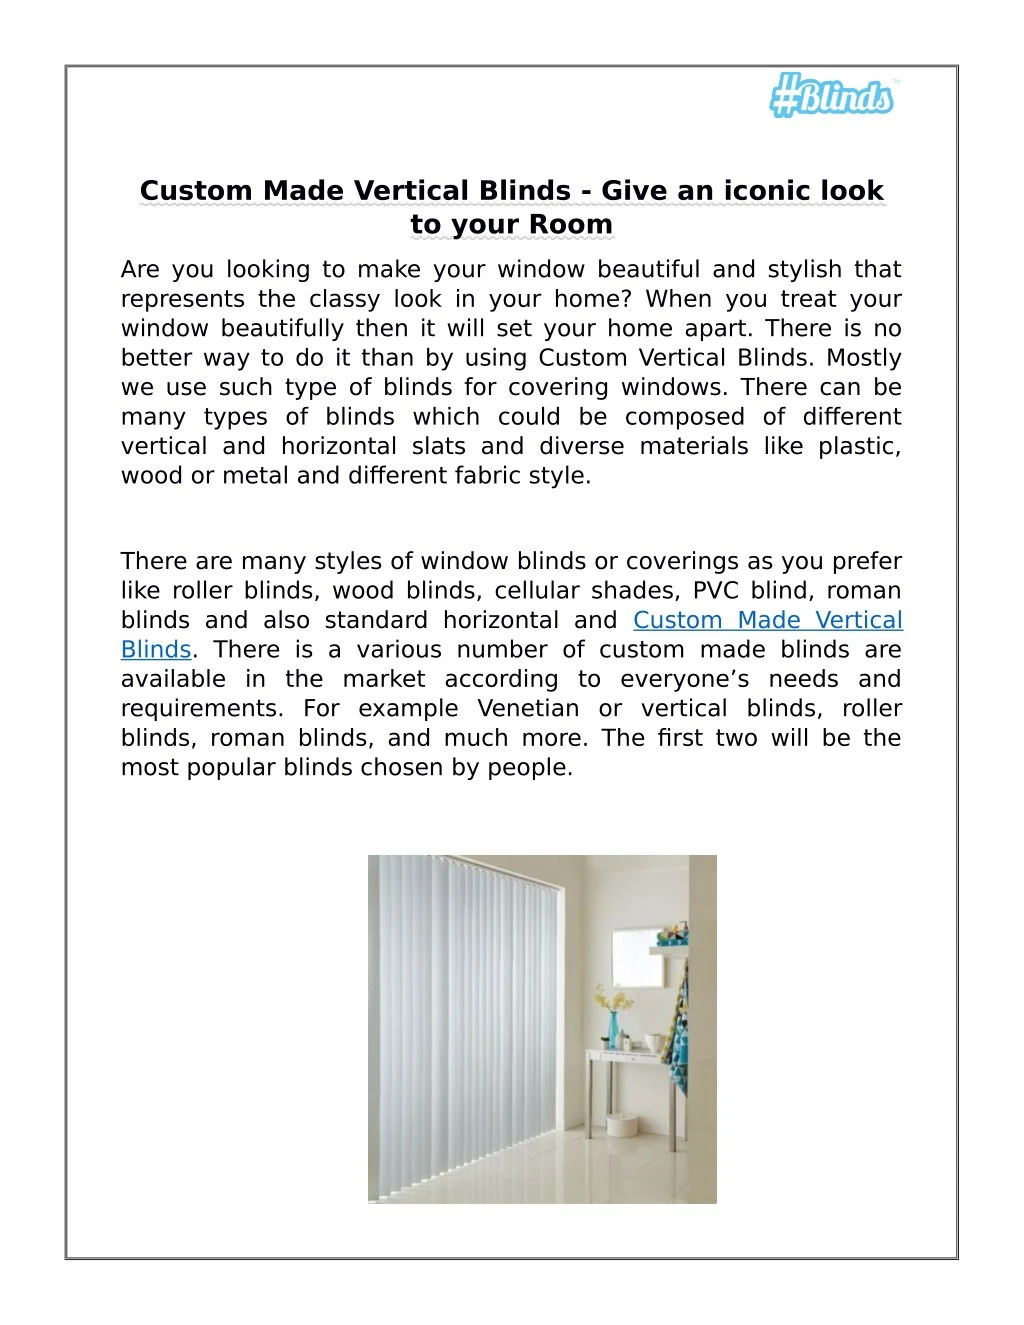 custom made vertical blinds give an iconic look